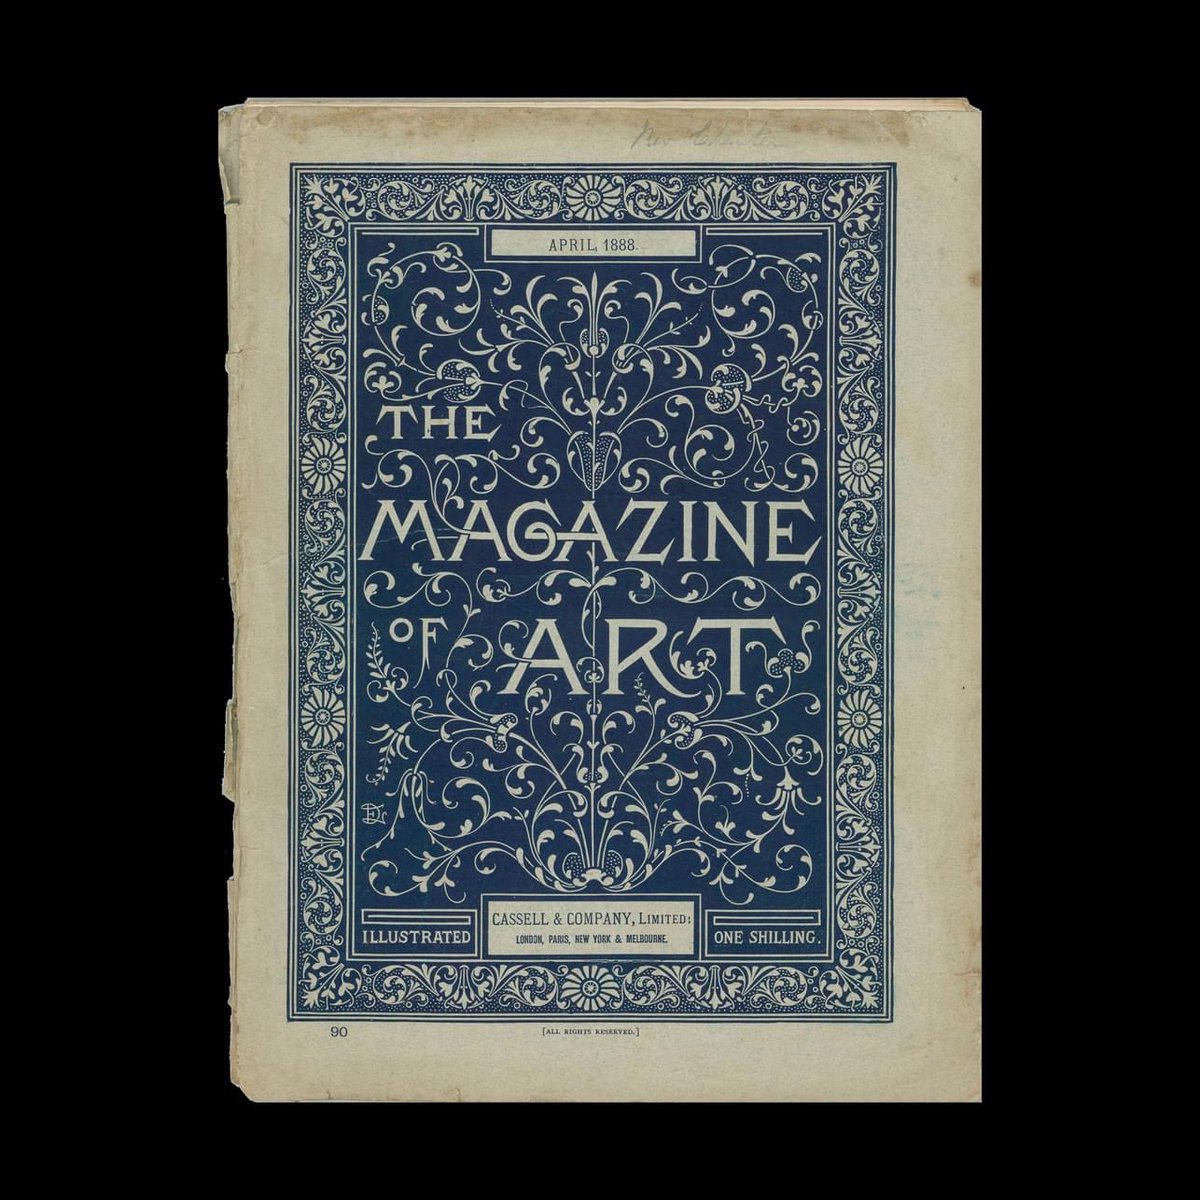 The Magazine of Art. Three issues from 1888 - 1890. Features some great advertisements, illustrations and typographics. Unfortunately too fragile to scan more. designreviewed.com/archive/ #designhistory #art #decorativeart #floralmotif #typography